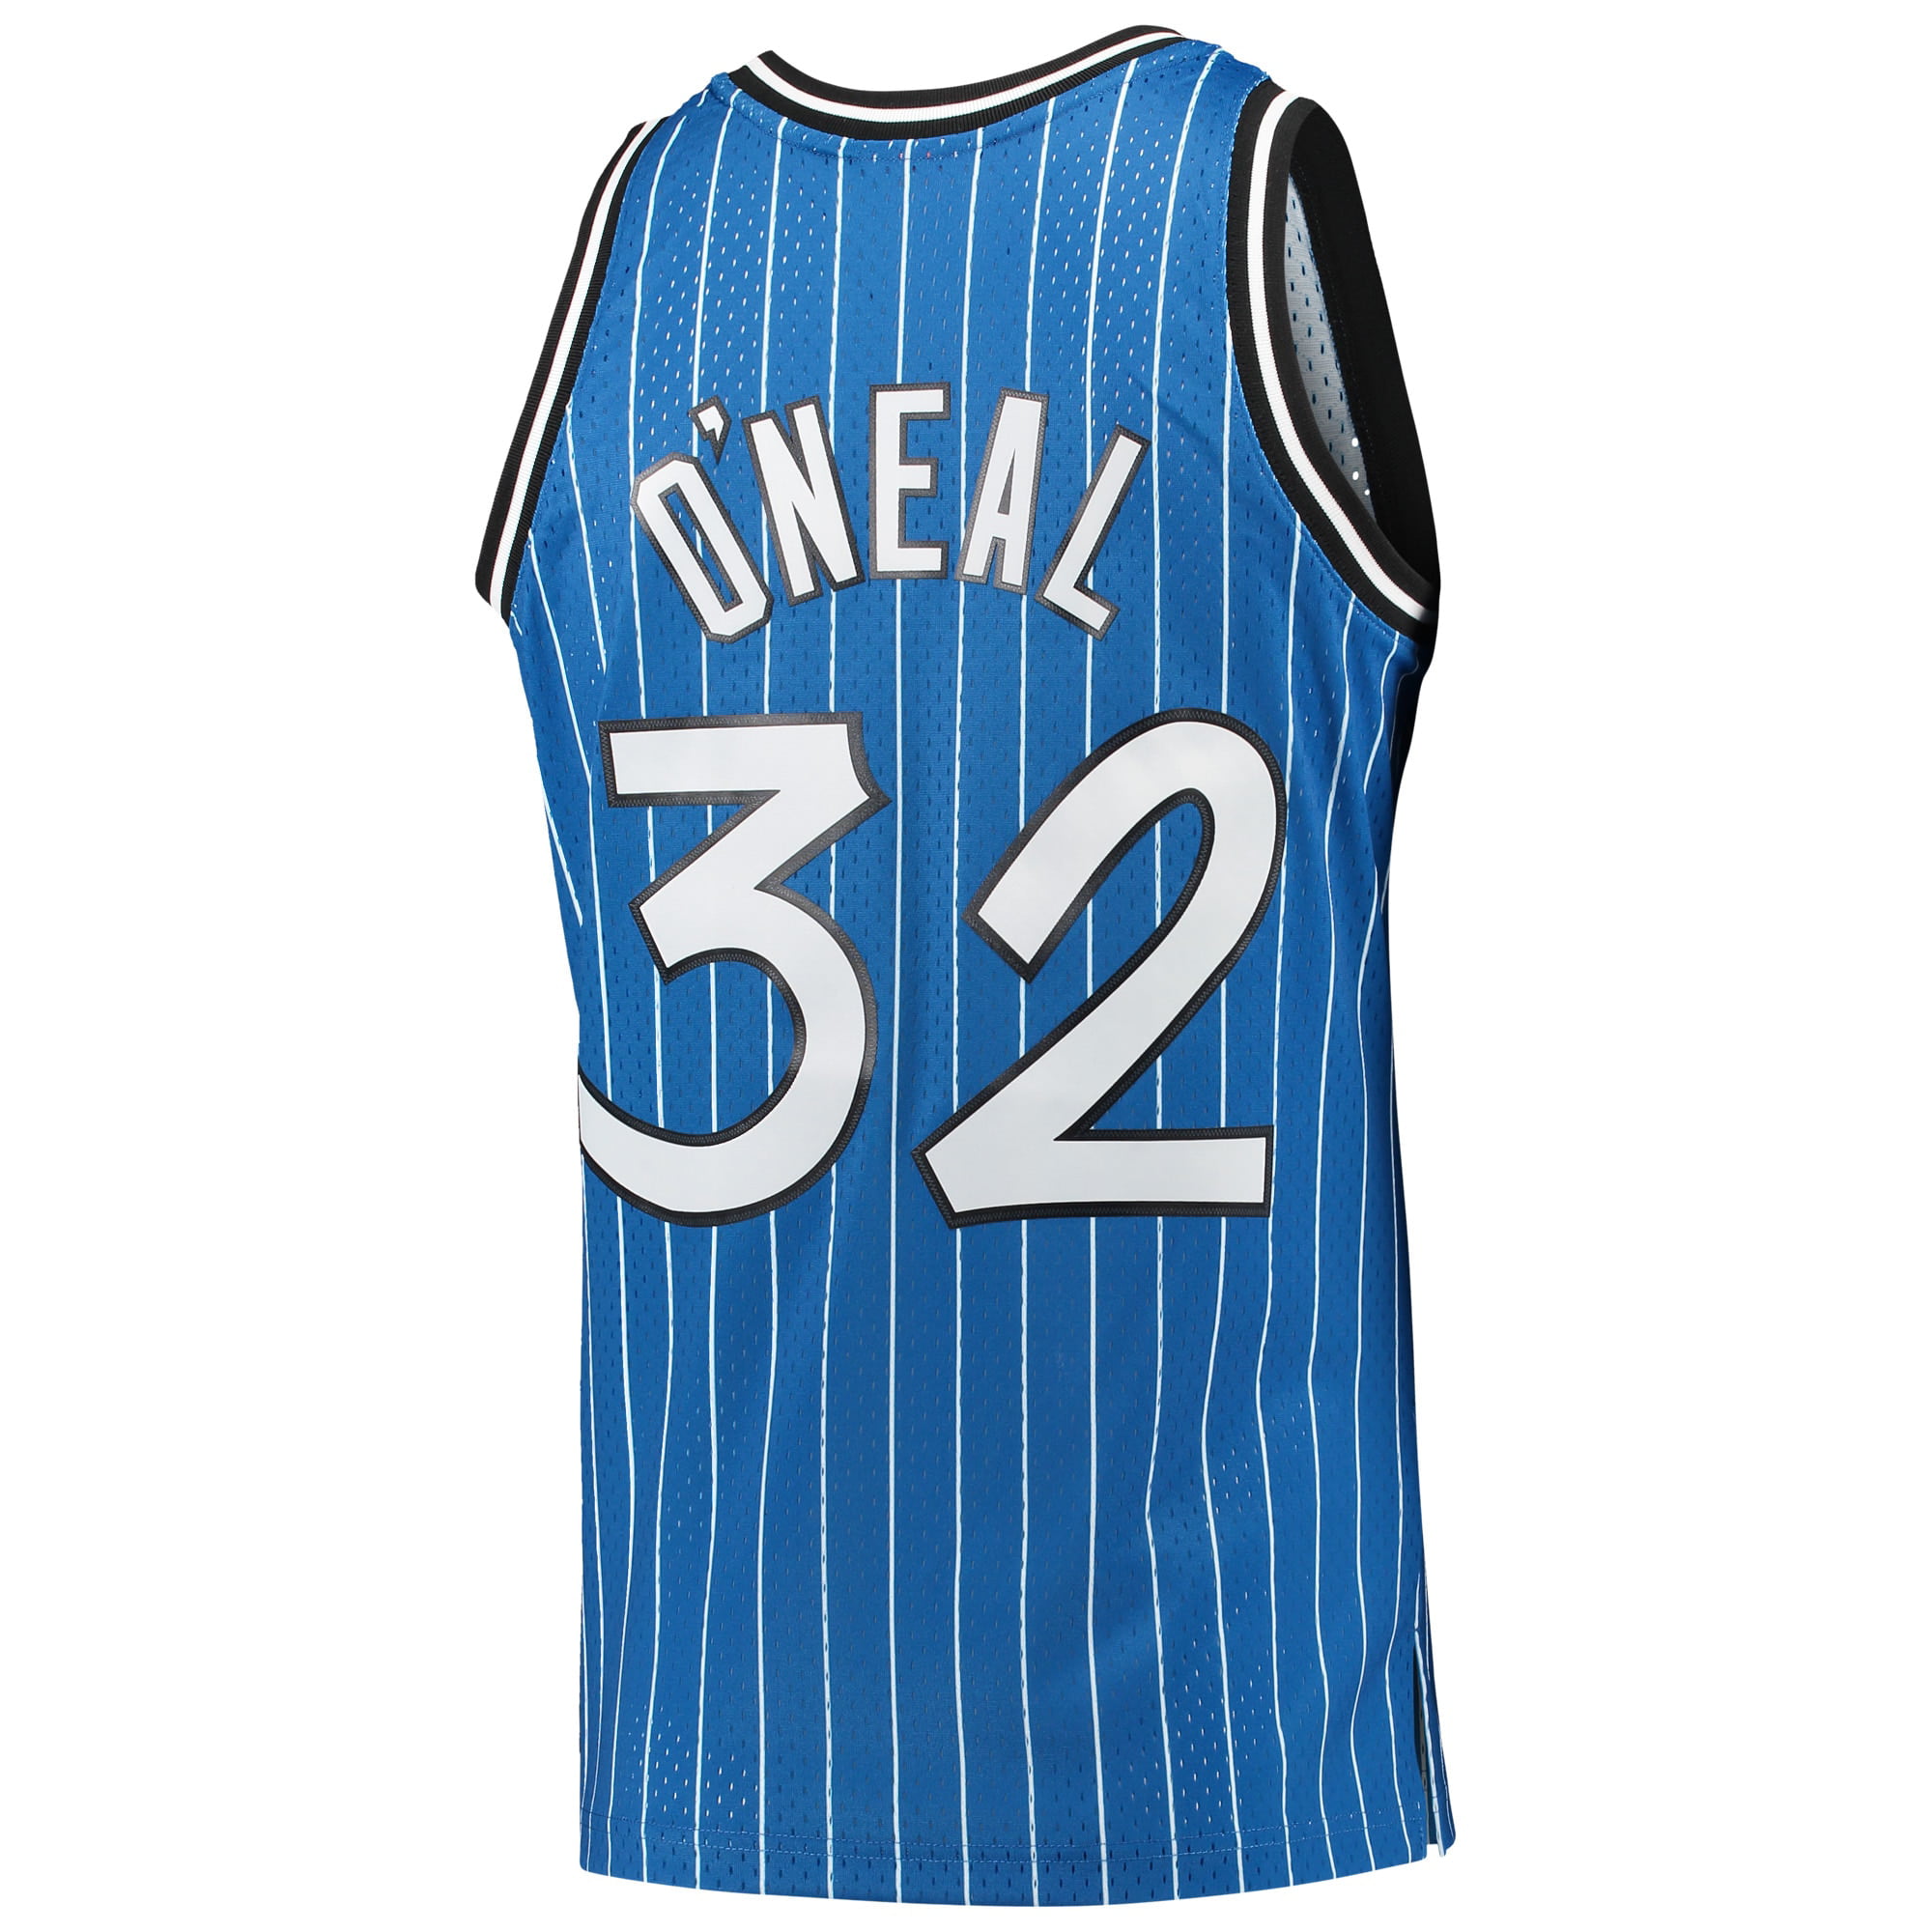 Mitchell and ness Shaquille O'Neal 1994-95 Jersey Orlando Magic